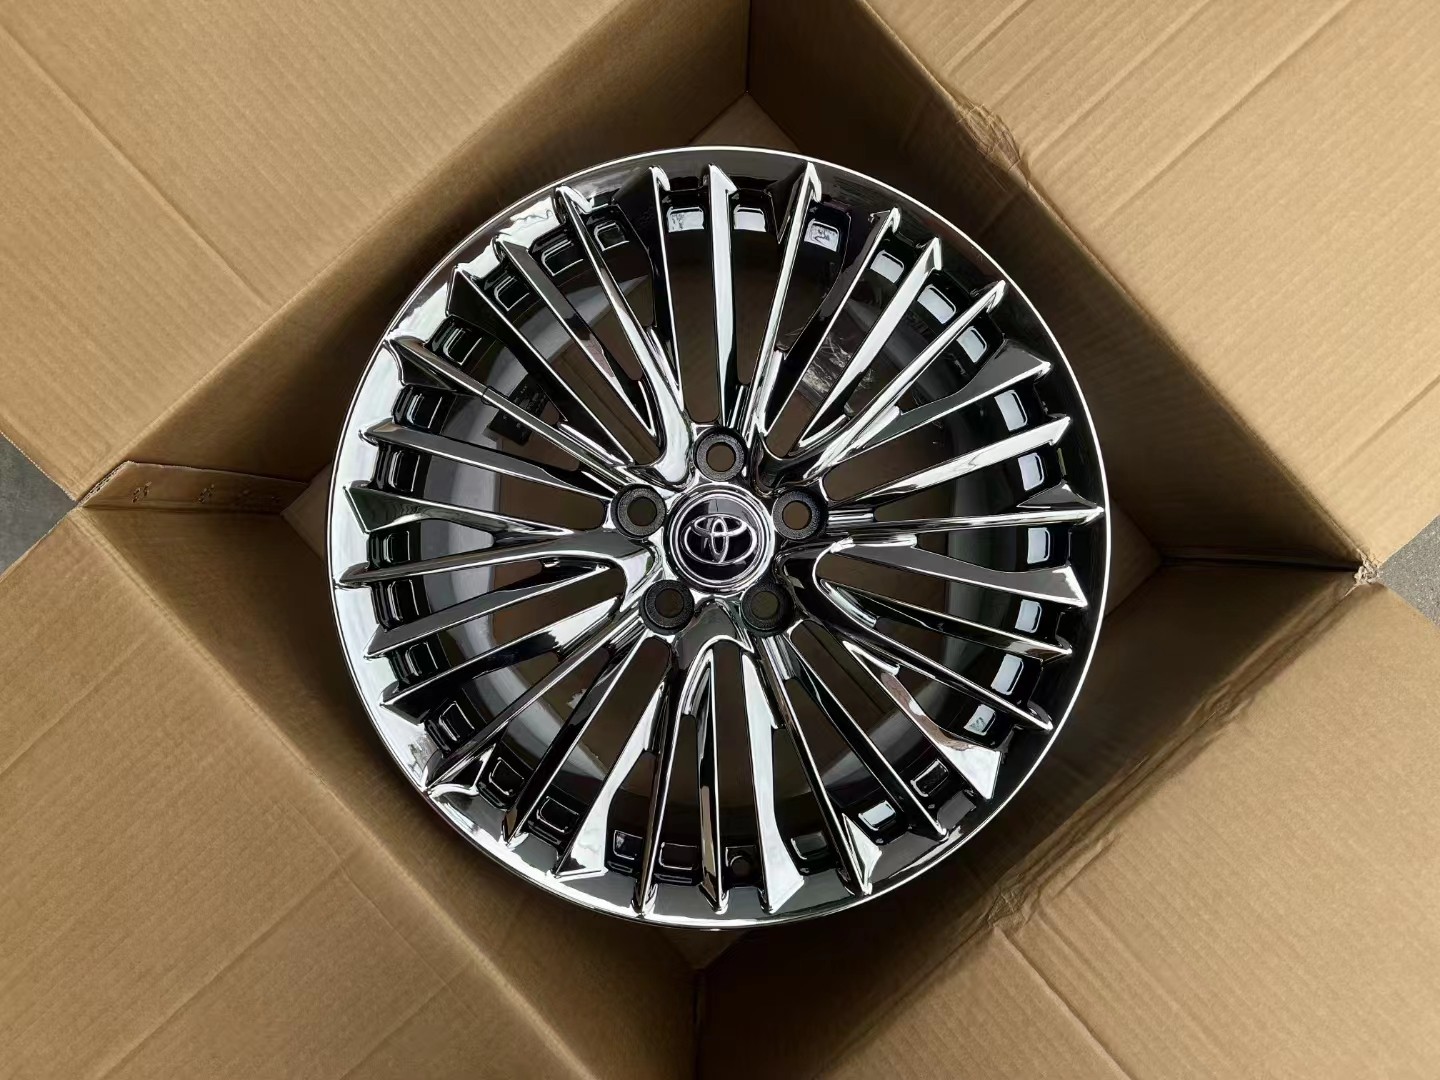 Custom aluminum forged wheel for Toyota Alphard and Sienna with electroplated surface